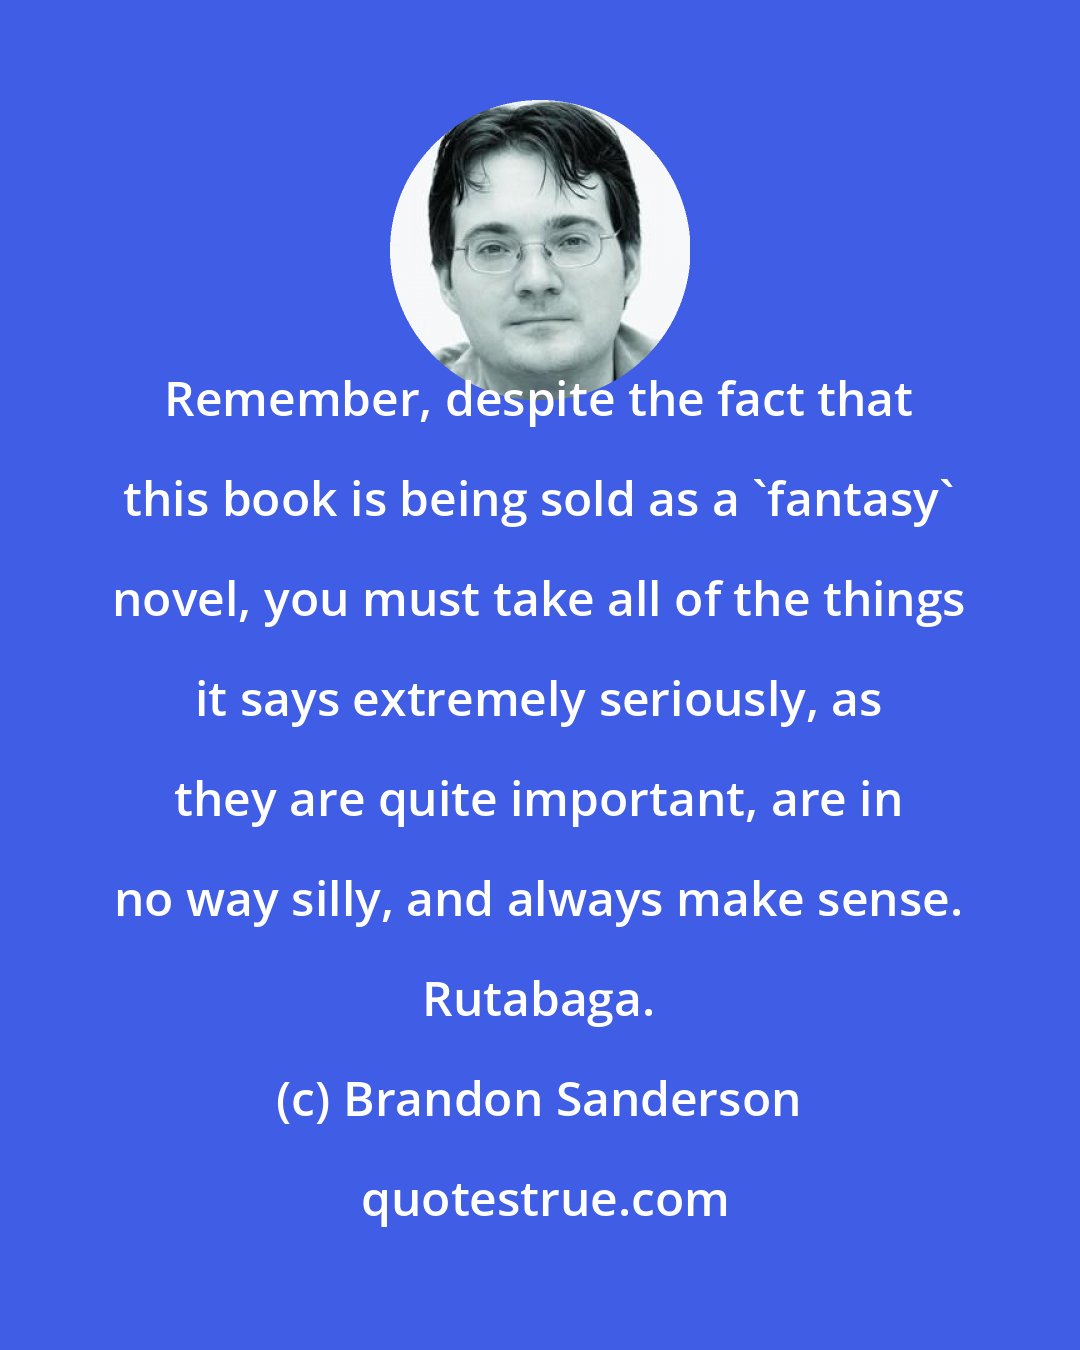 Brandon Sanderson: Remember, despite the fact that this book is being sold as a 'fantasy' novel, you must take all of the things it says extremely seriously, as they are quite important, are in no way silly, and always make sense. Rutabaga.